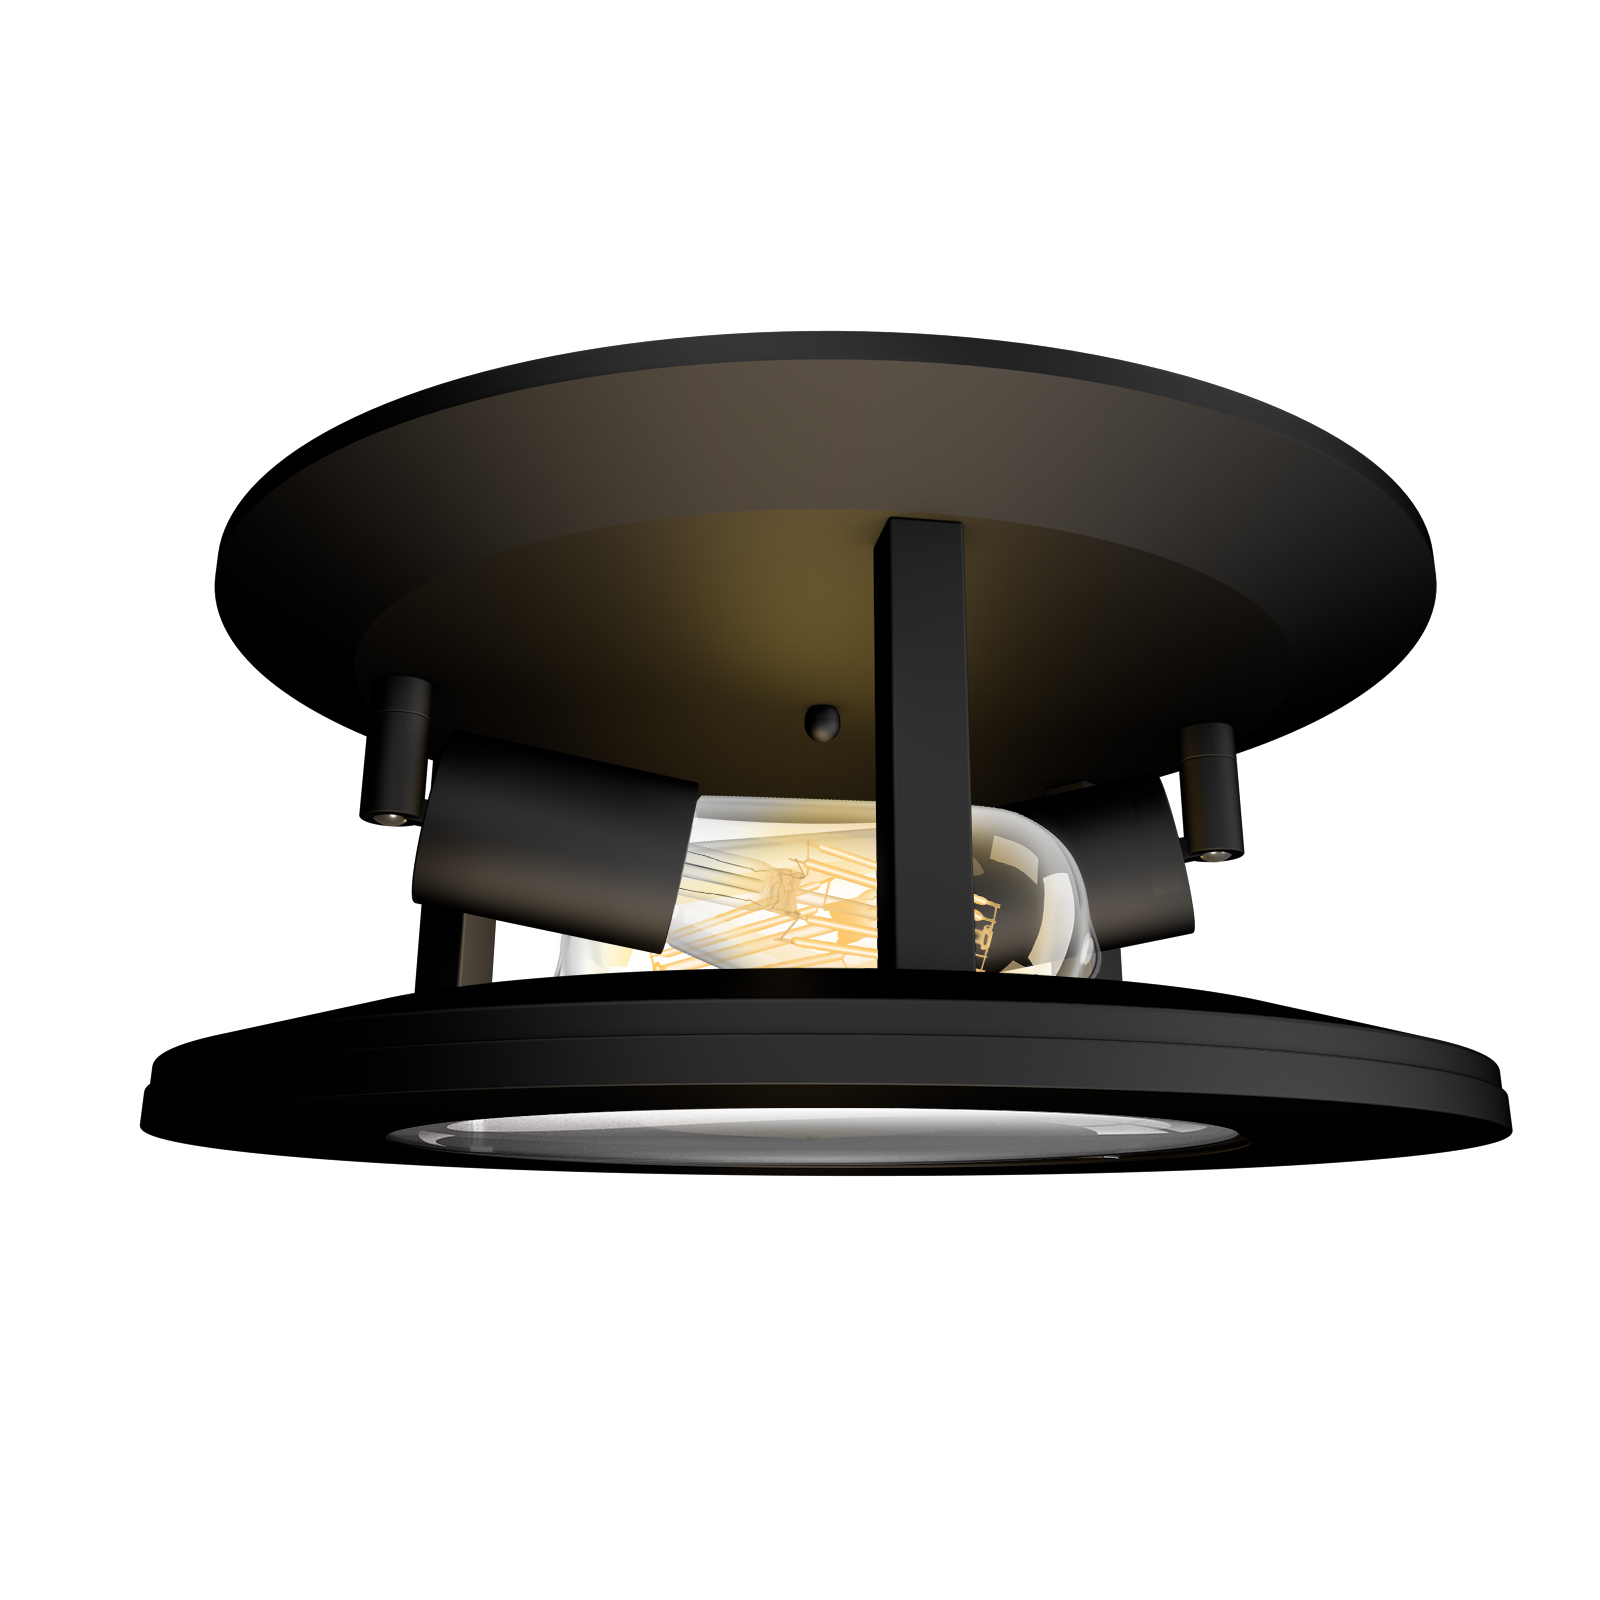 Industrial Ceiling Light Fixture, 2-Light Farmhouse Flush Mount Lighting Fixture, Metal Black Finish with Seeded Glass for Kitchen,Dining Room, Hallway, Foyer, " Продукты